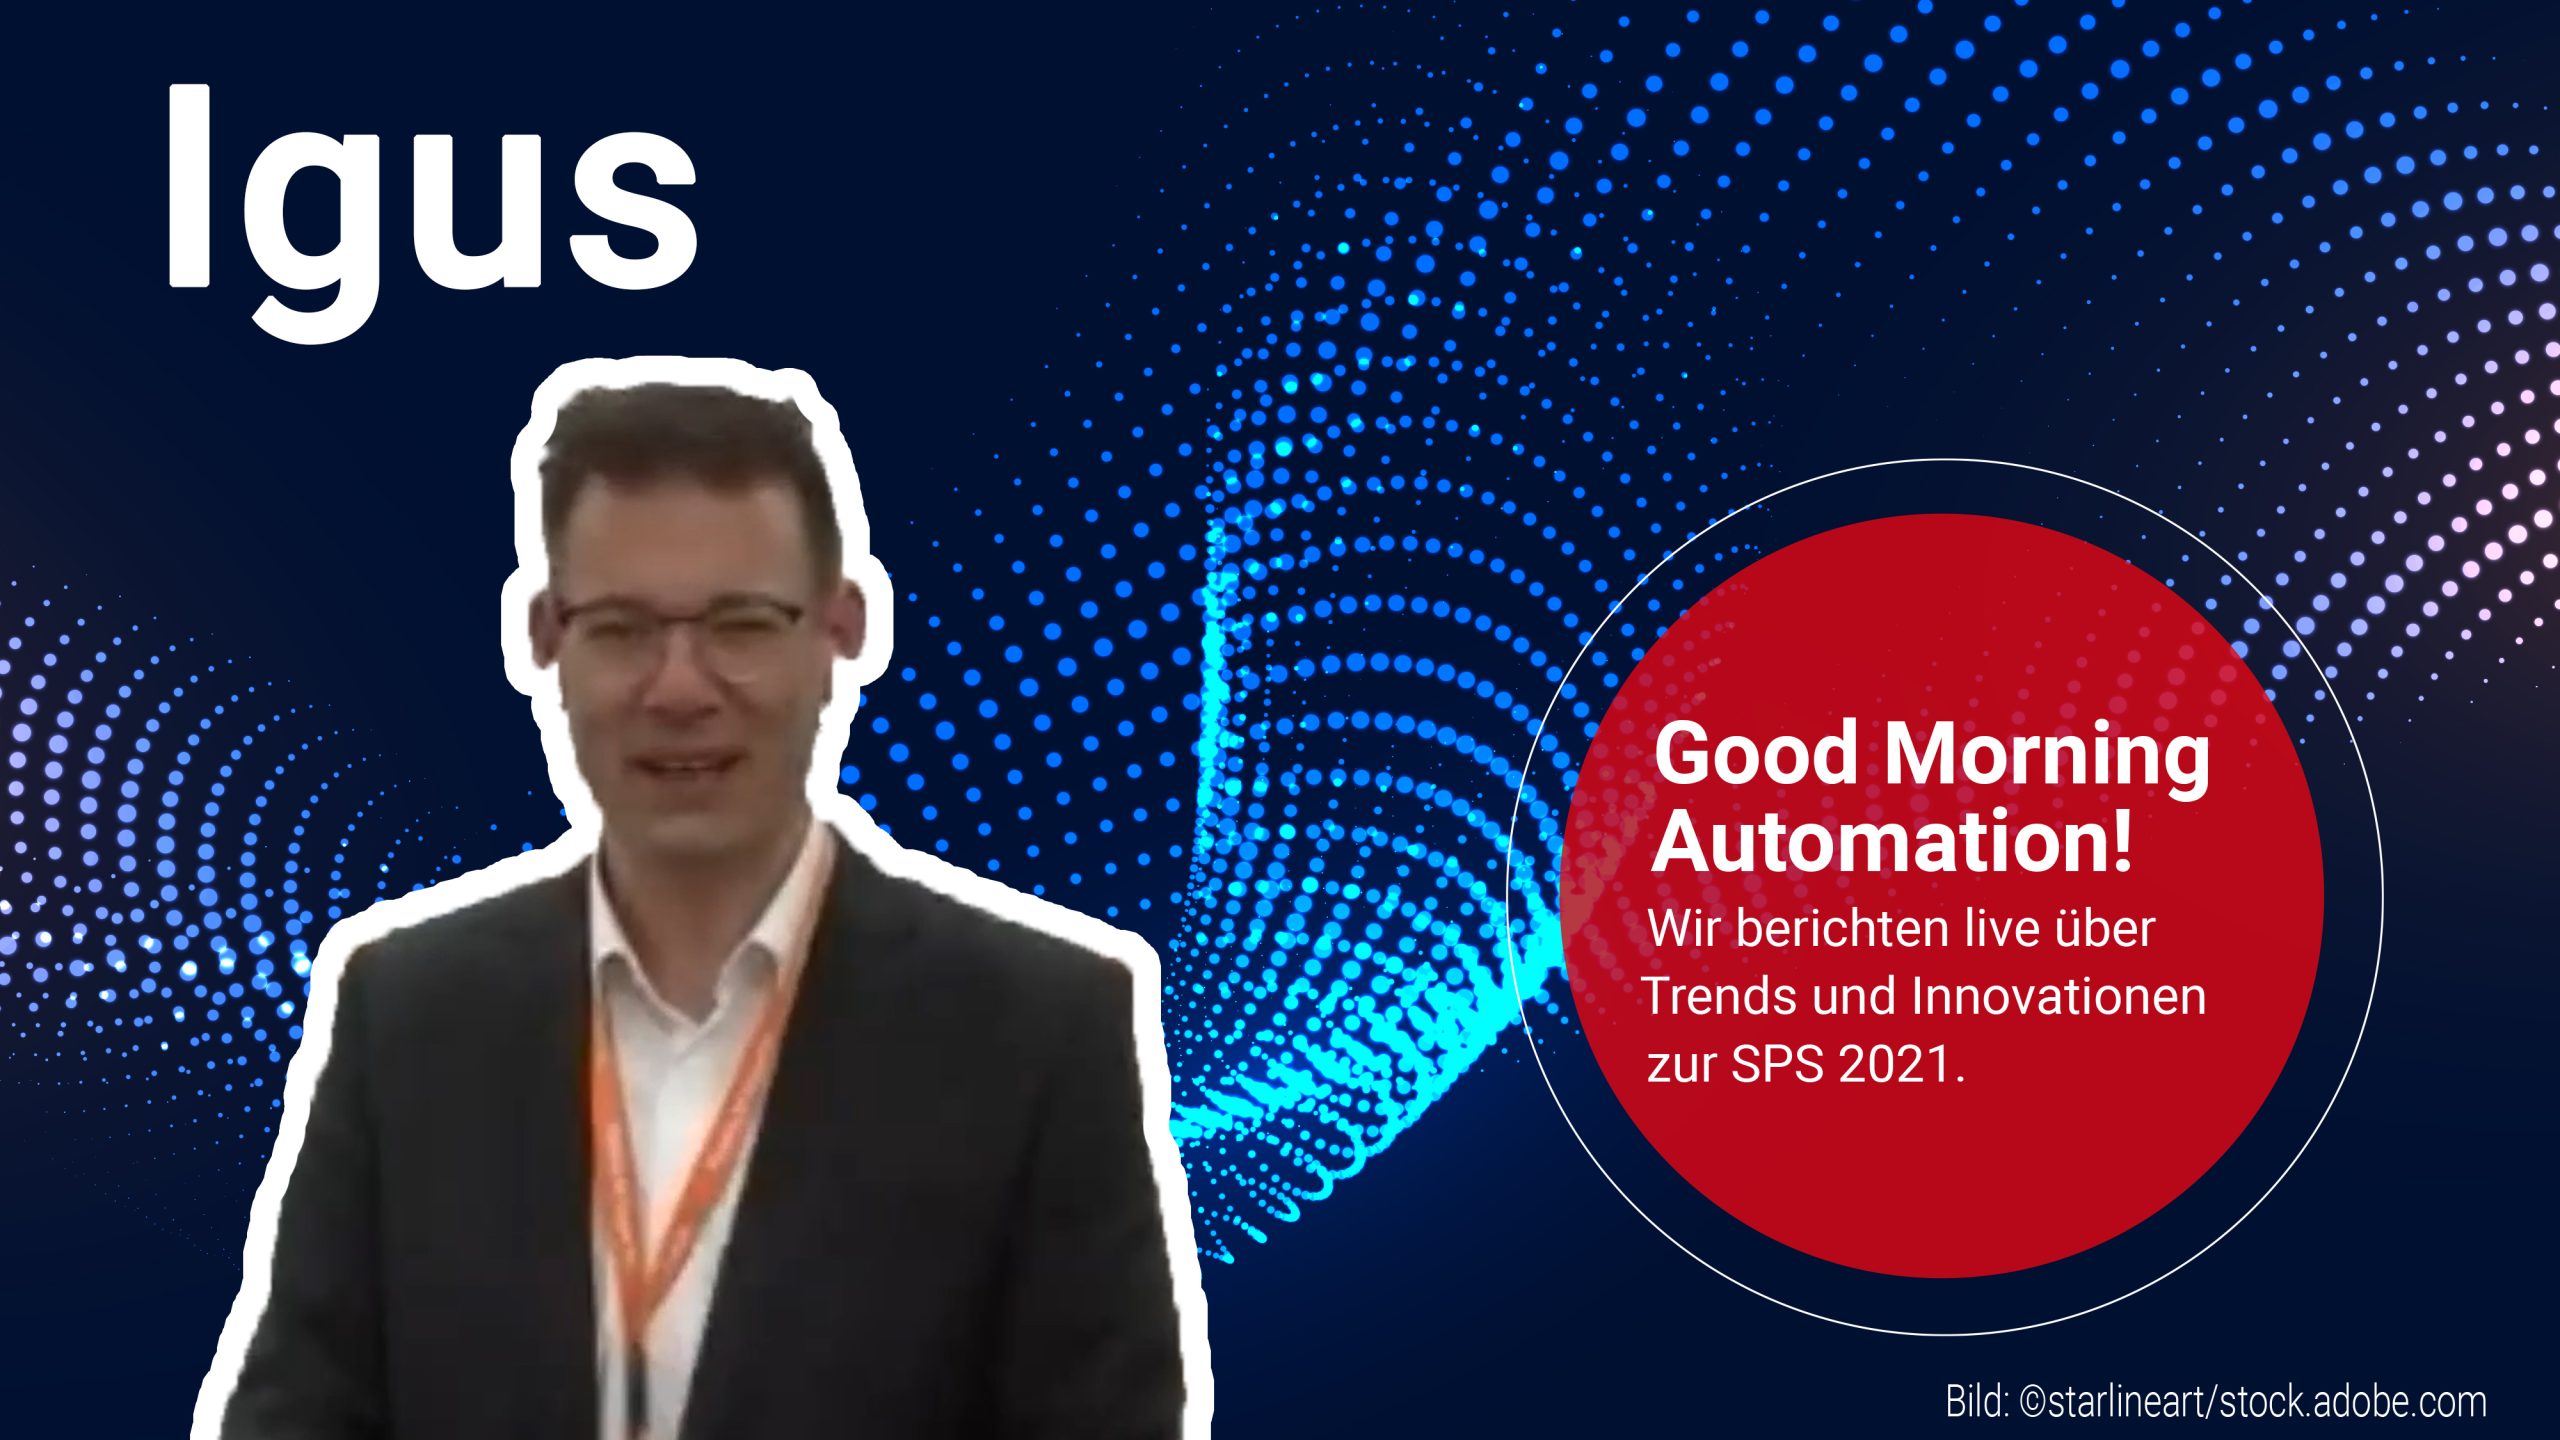 Igus bei Good Morning Automation Tag 2